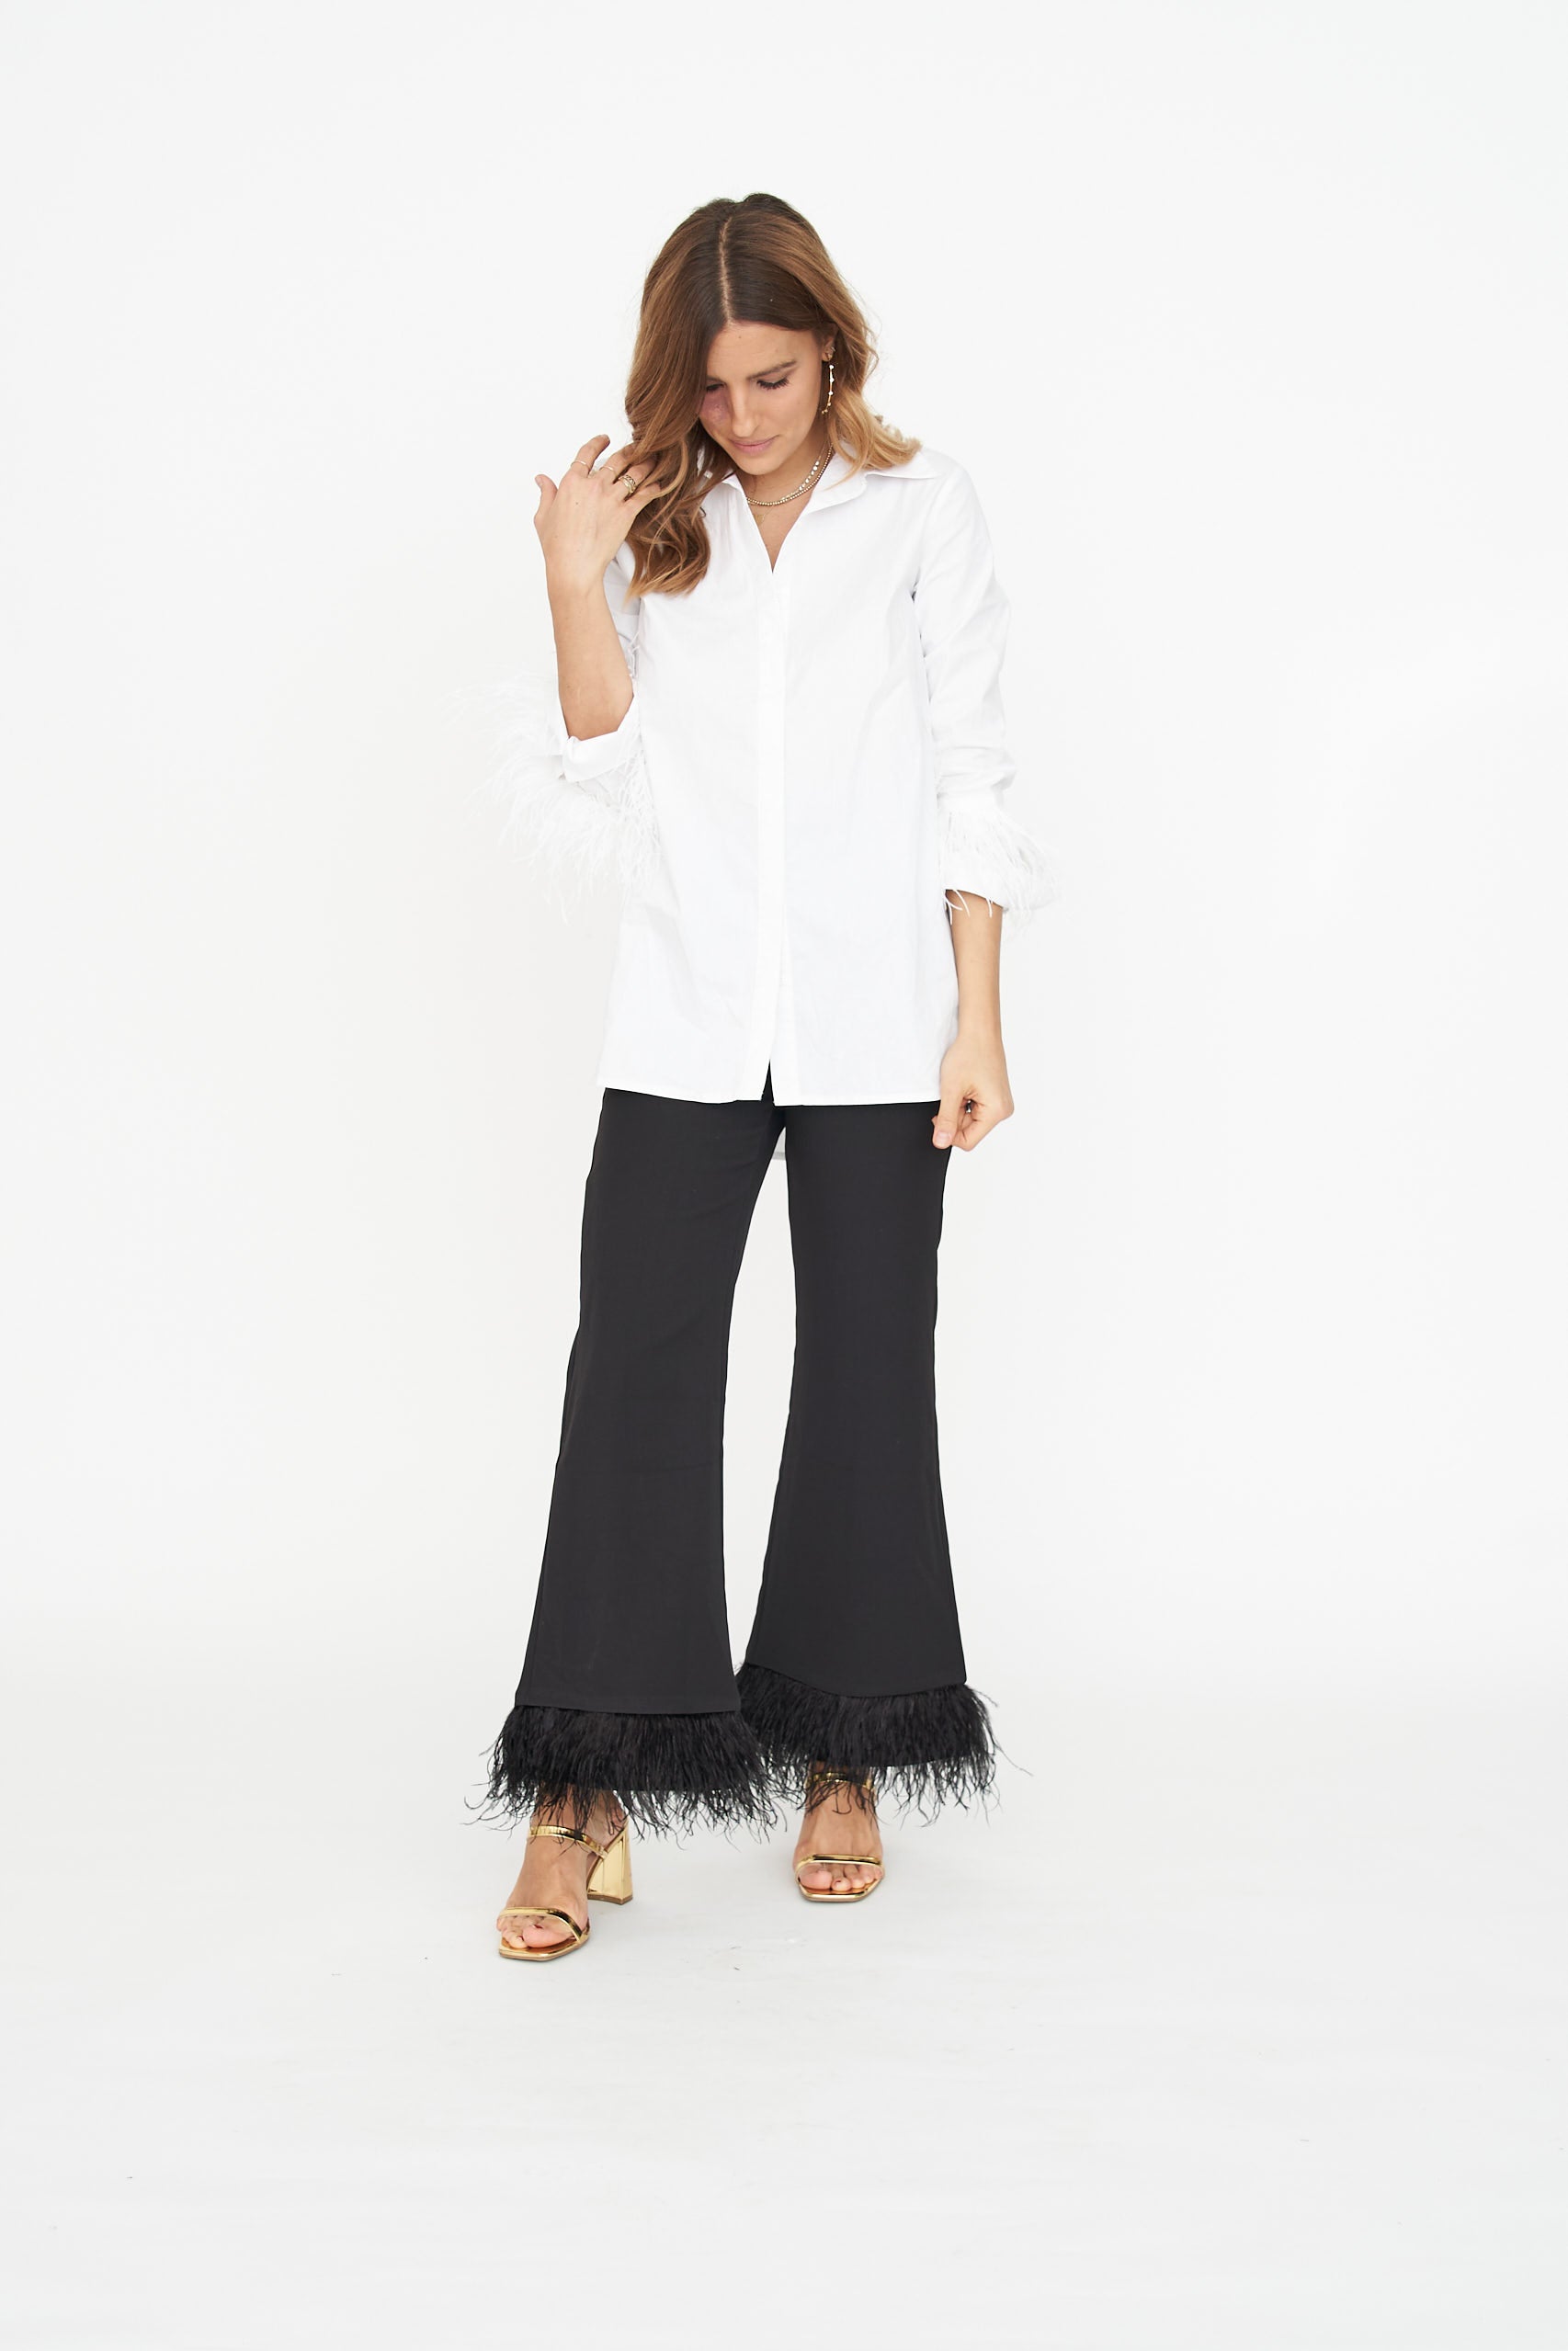 Lace Trim Black Trousers with Bandages